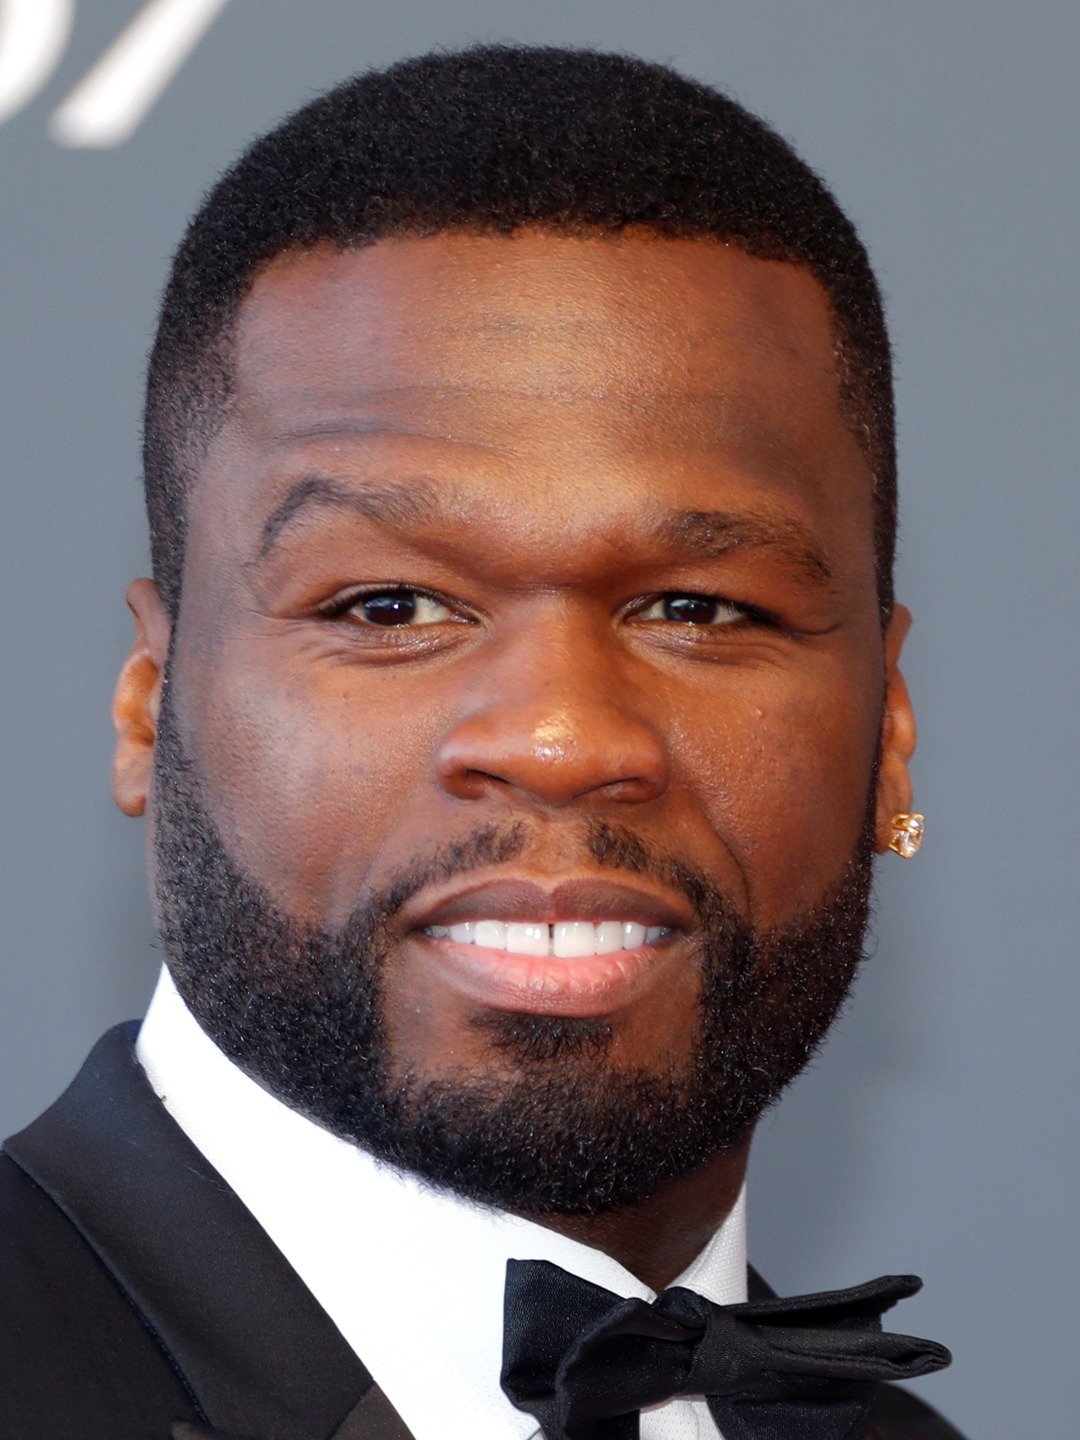 How tall is Curtis Jackson 50 Cent?